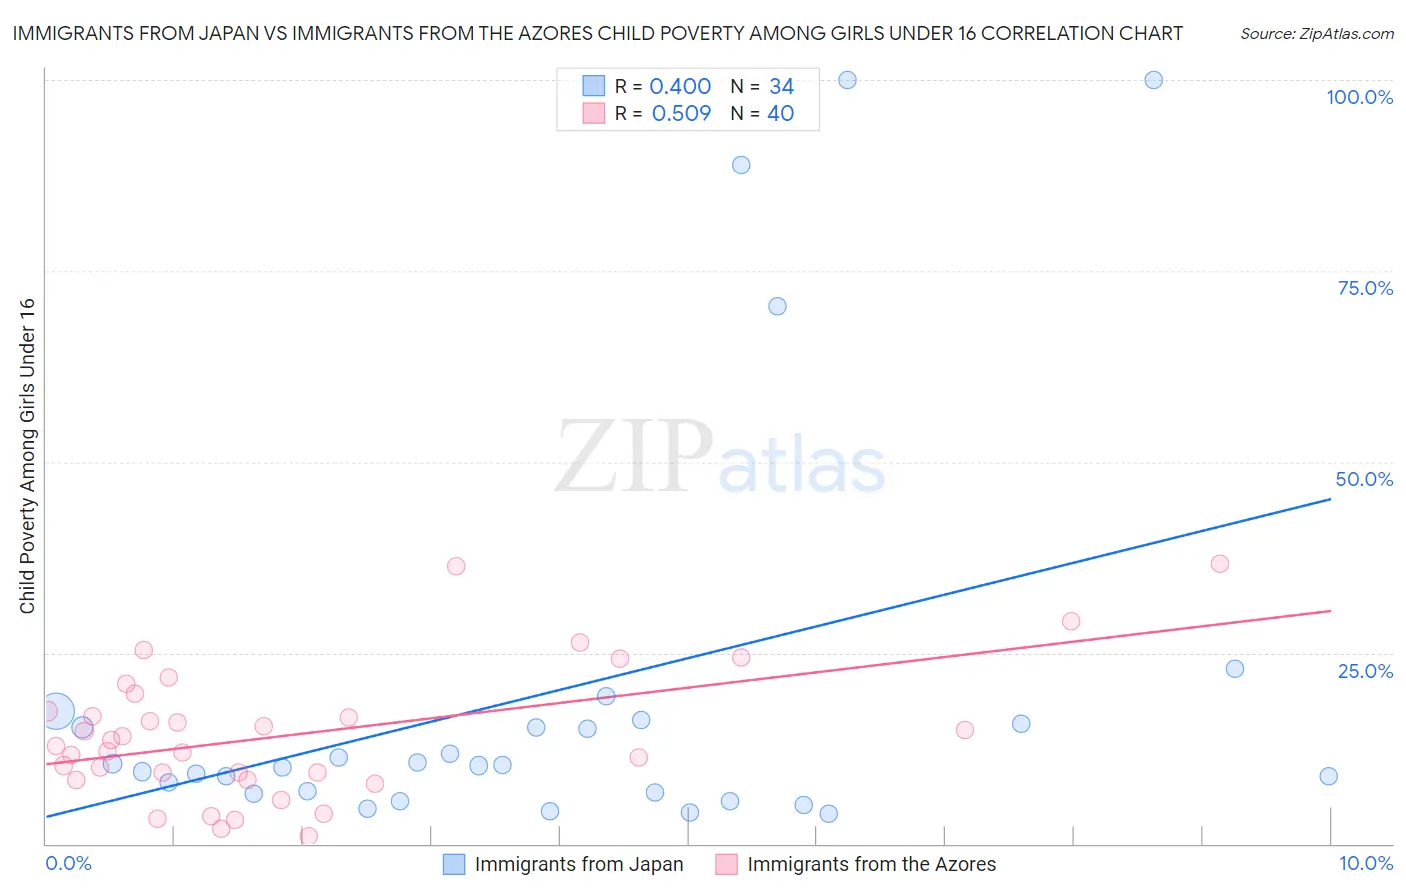 Immigrants from Japan vs Immigrants from the Azores Child Poverty Among Girls Under 16